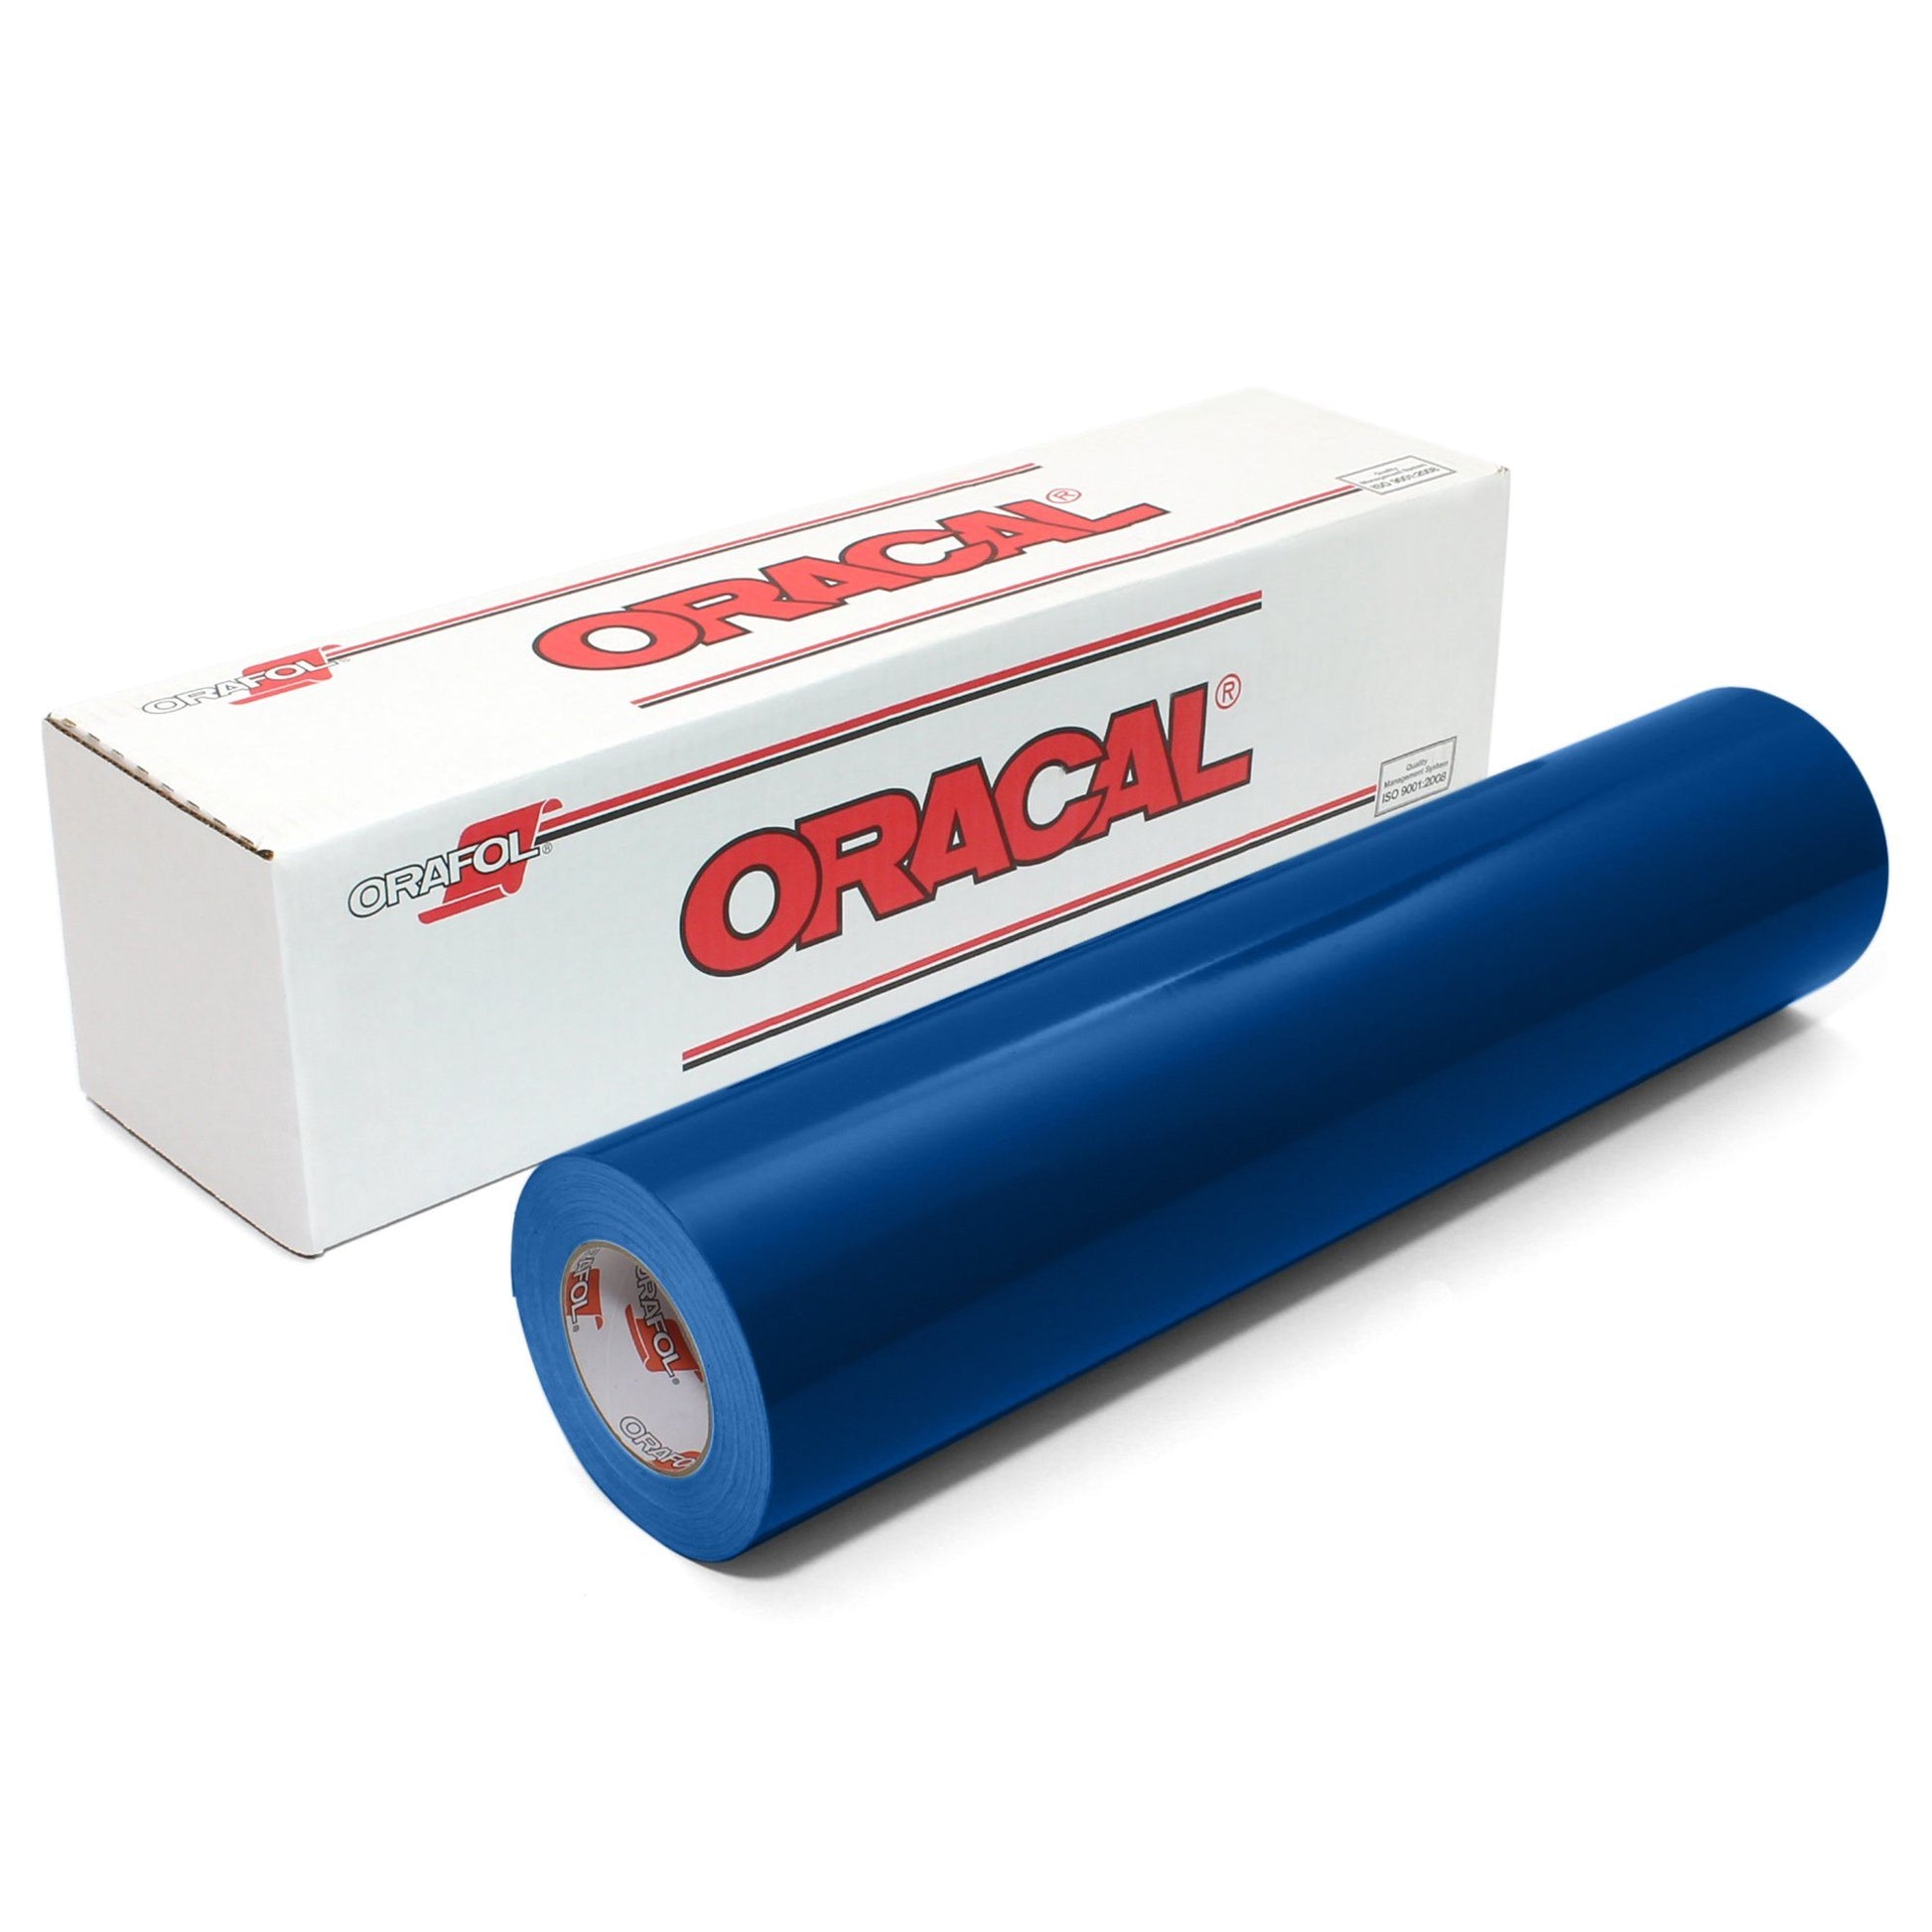 ORACAL 651 Vinyl 12 x 60 Rolls Choose from 47 Colors Including Toolset  (47 Rolls (1 of Each!))